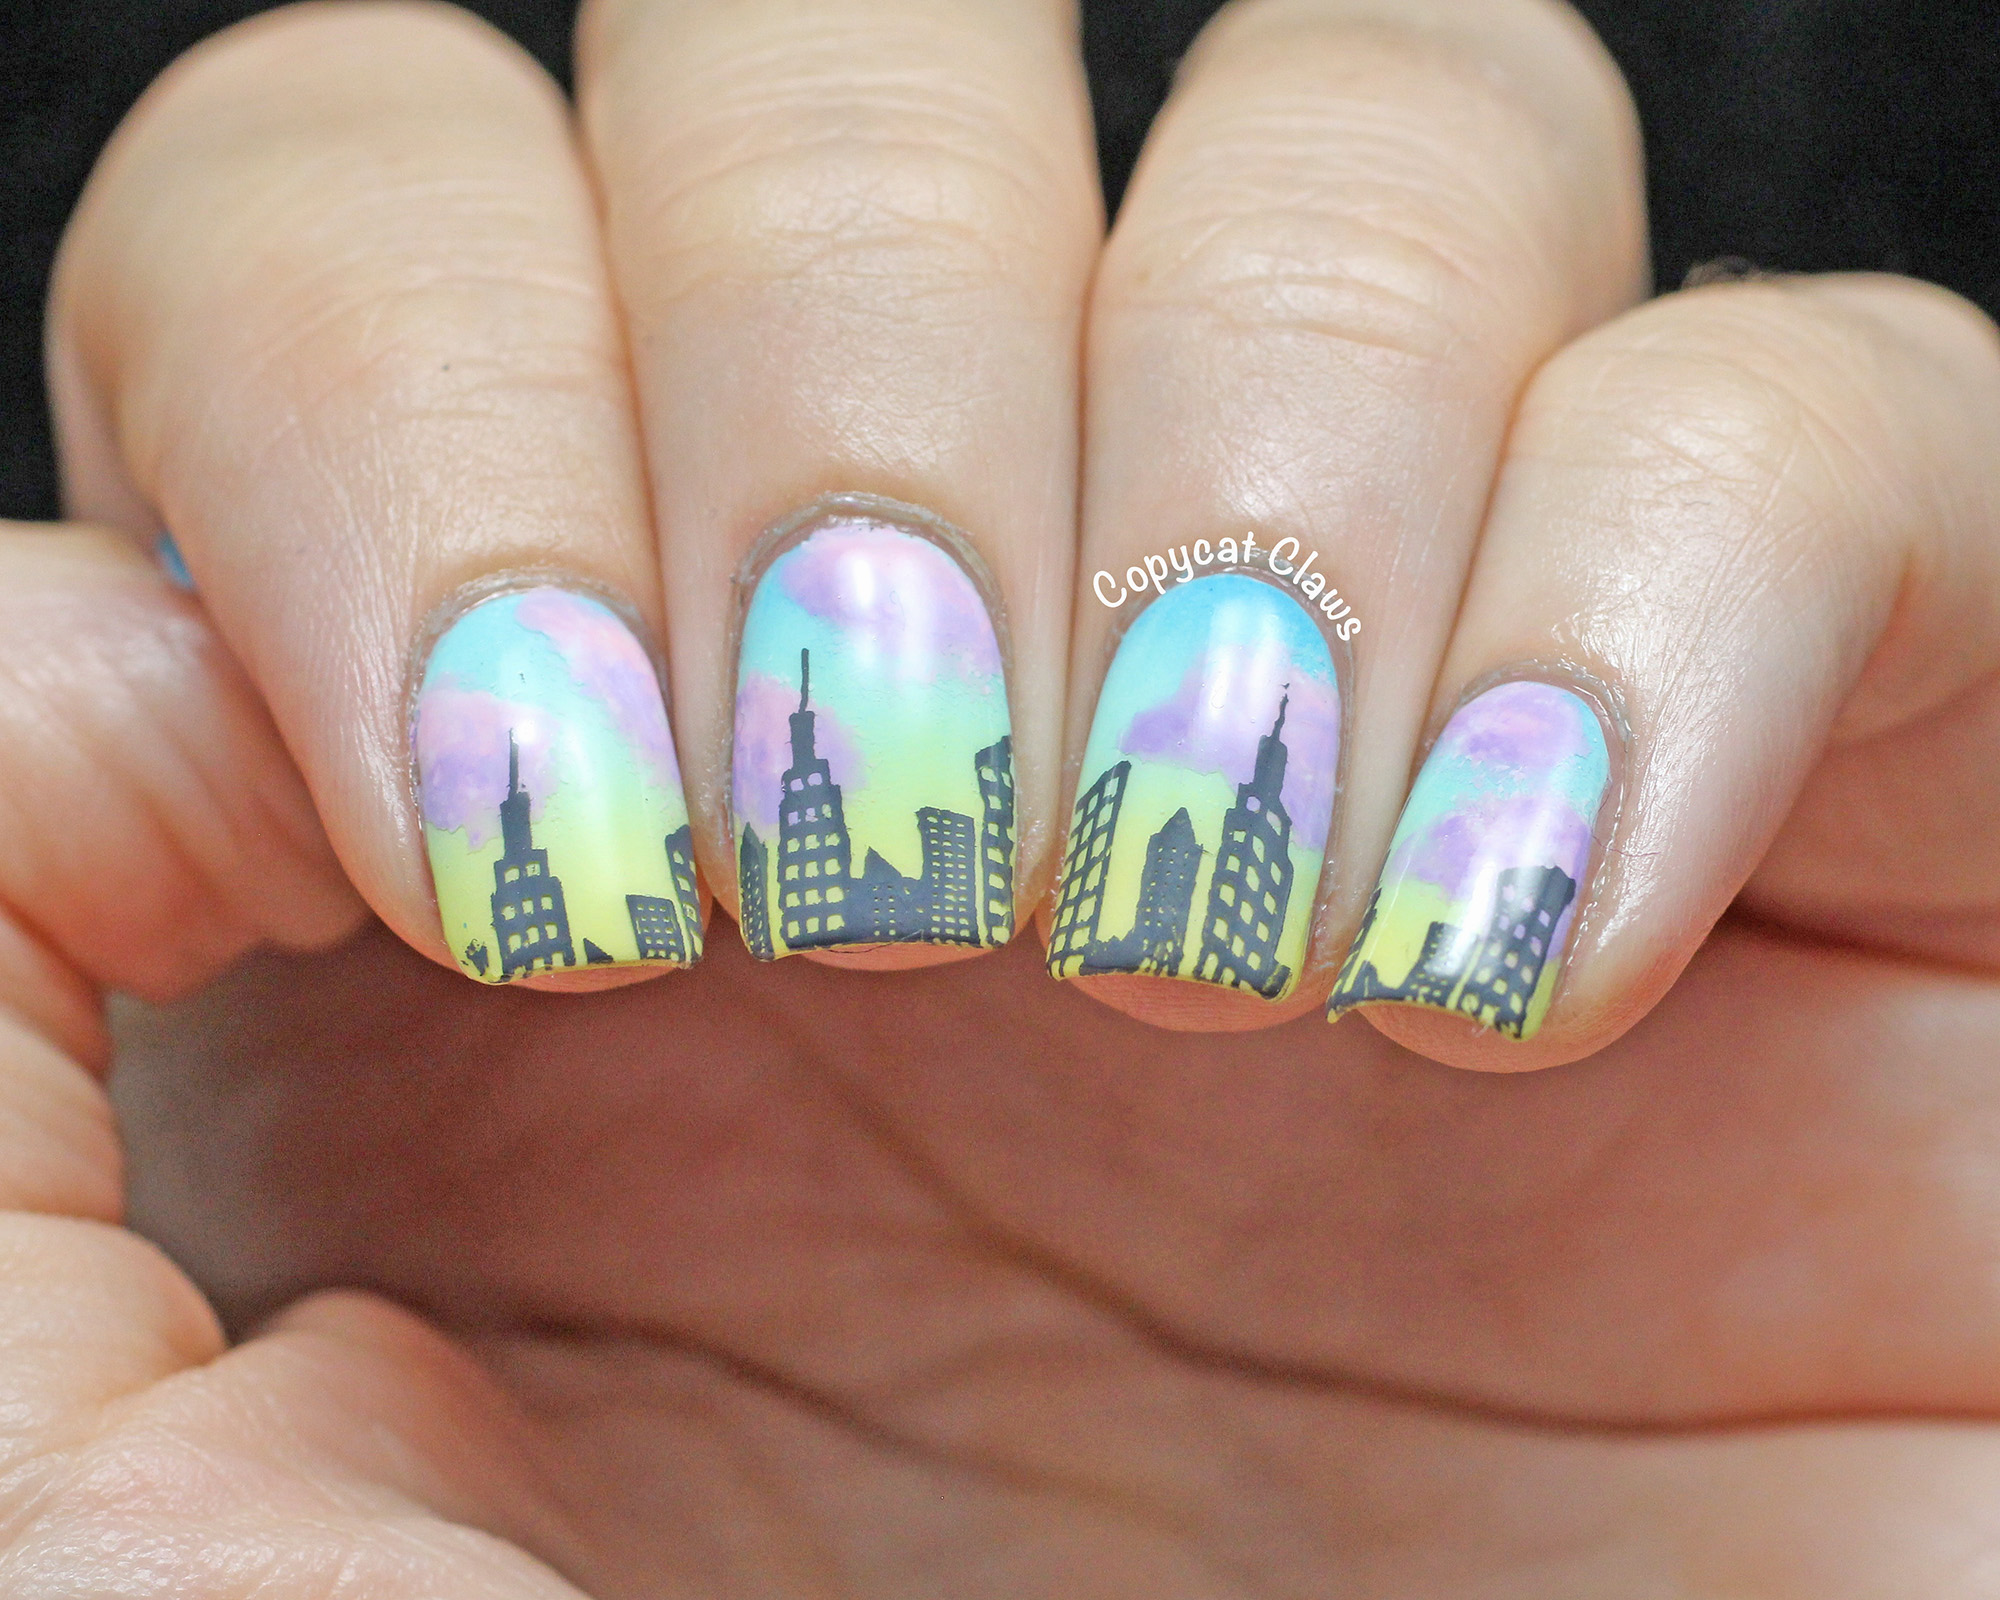 5. "NYC Skyline Nail Stamping" - wide 3